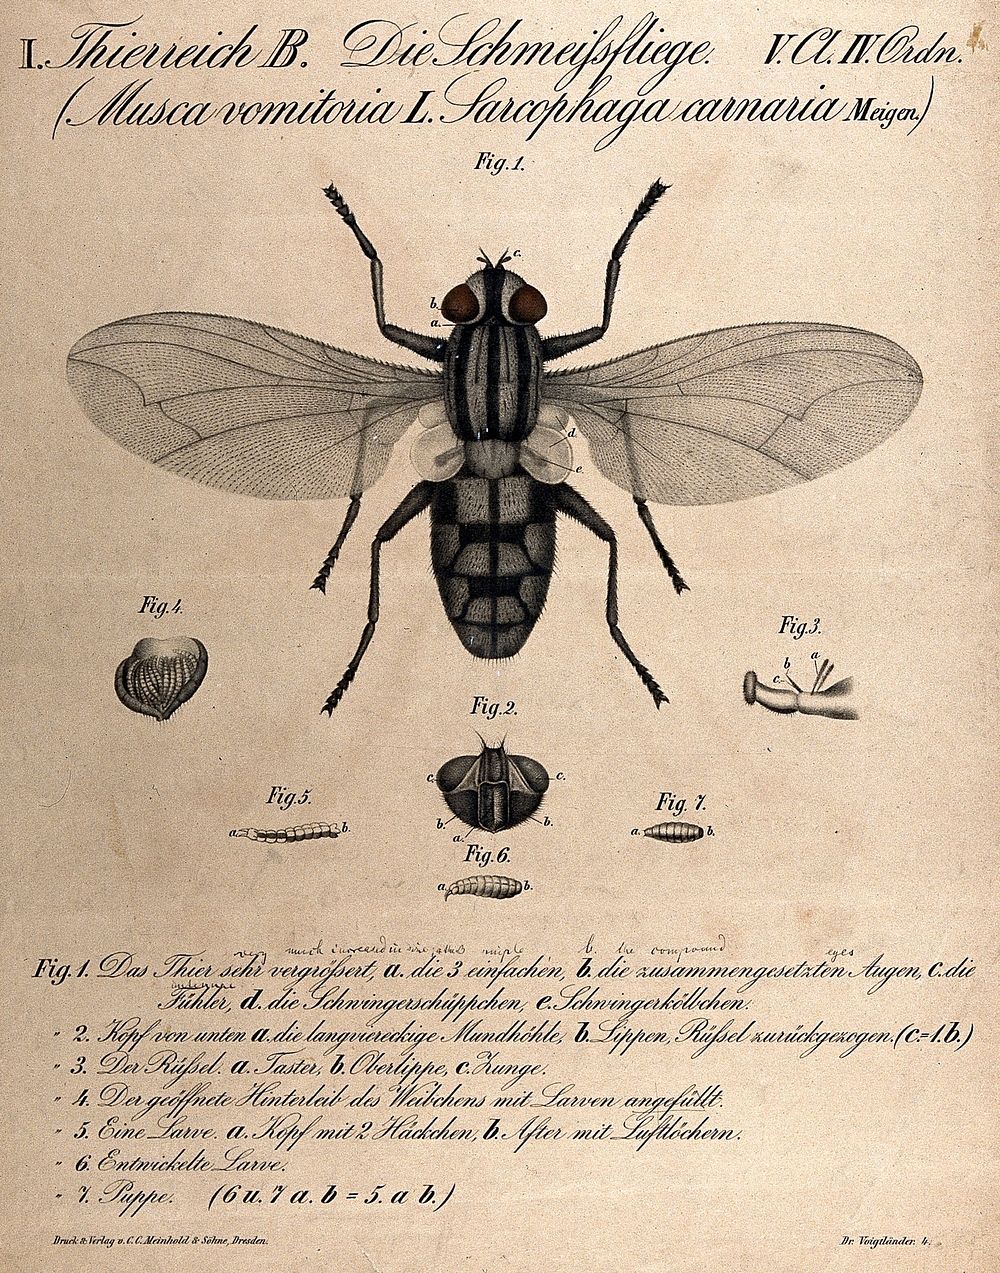 A bluebottle fly: seven figures, including details showing the head and pupae. Chromolithograph, 1870.